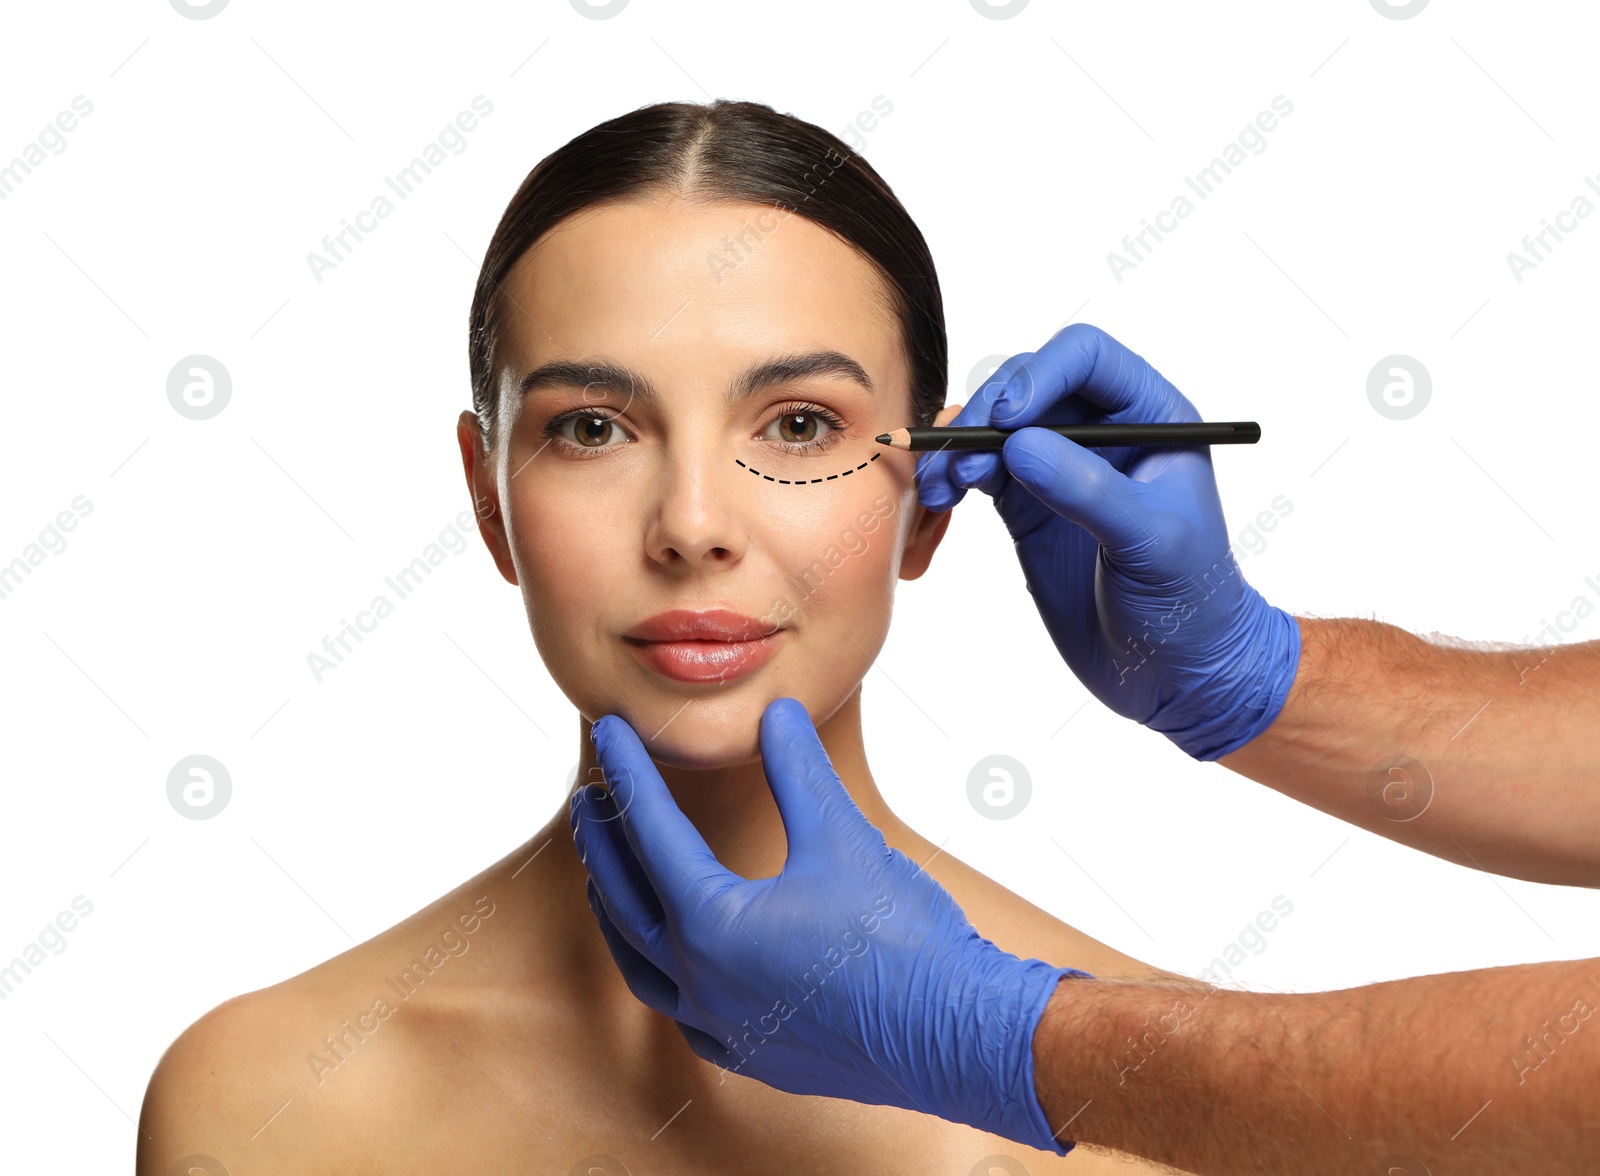 Image of Woman preparing for cosmetic surgery, white background. Doctor drawing markings on her face, closeup